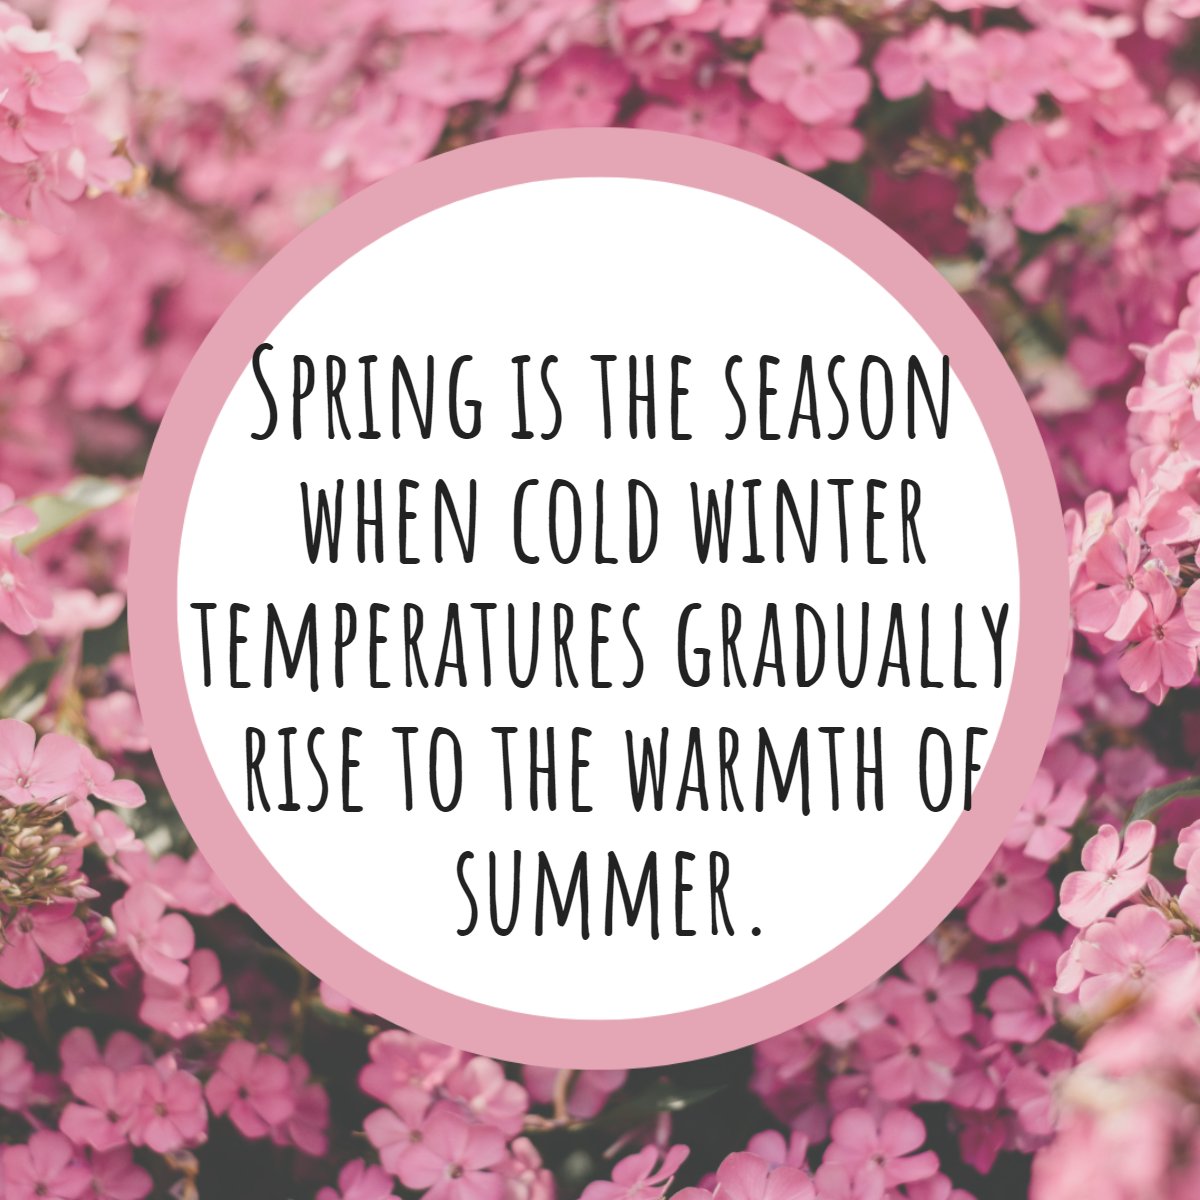 Do you love spring?

What do you usually do during spring? Let us know below! 👇

#Spring  #Funfact  #Factoftheday
#chadwickknight #realtor #realestate #floridarealtor #floridarealestate #mvprealty #realestateadvisor #homesforsale #property #forsale #newhome